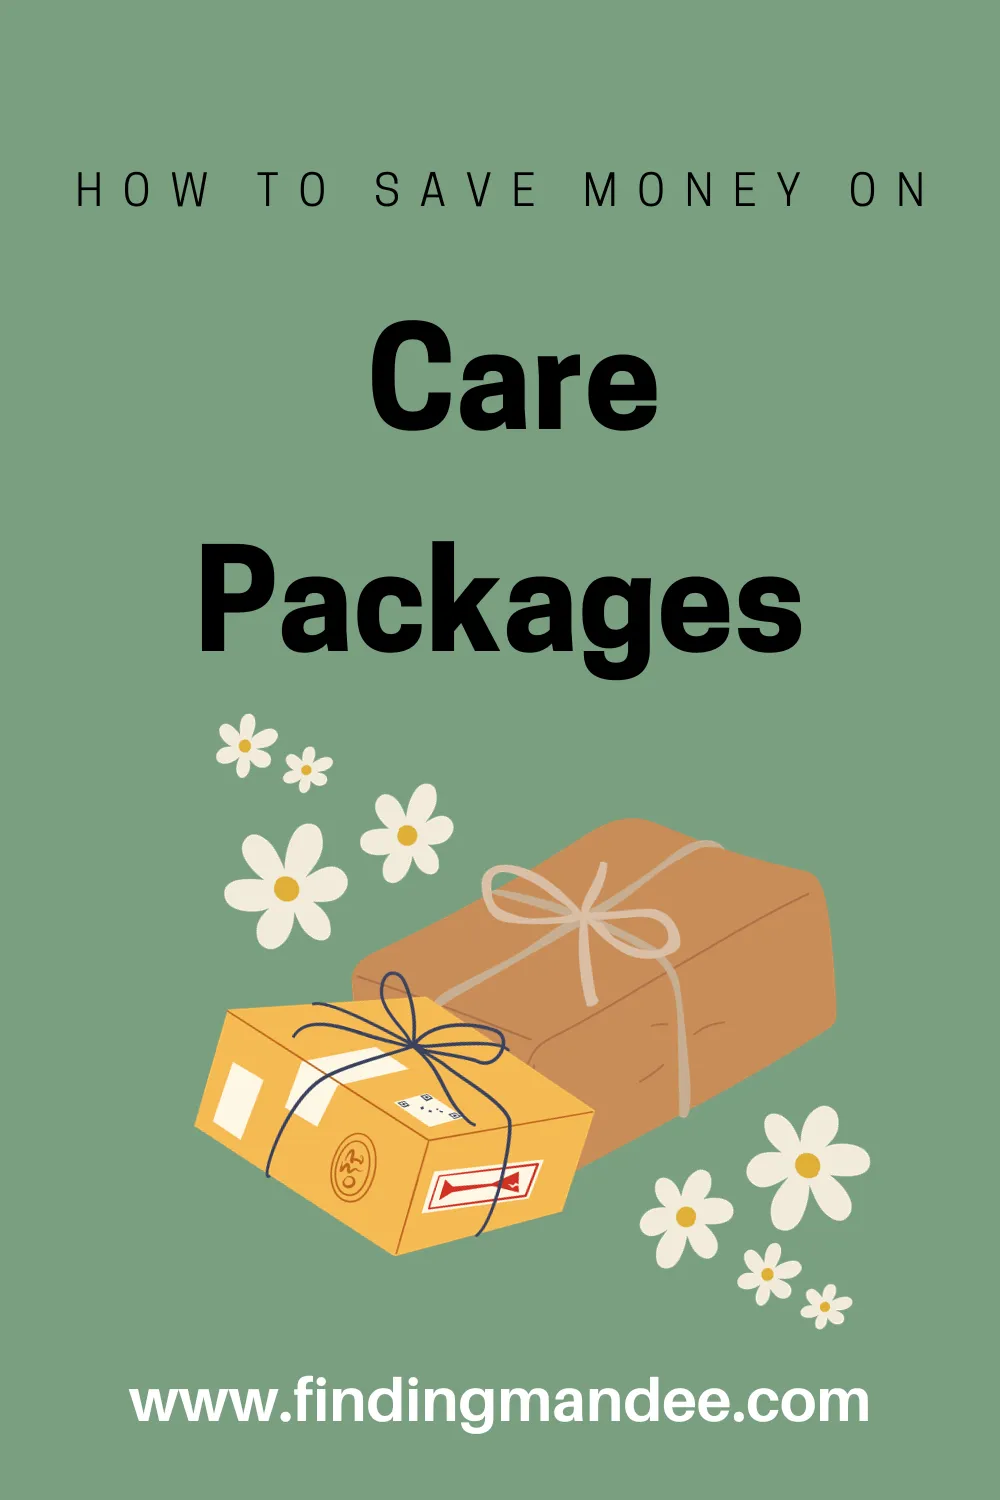 How to Save Money on Care Packages | Finding Mandee